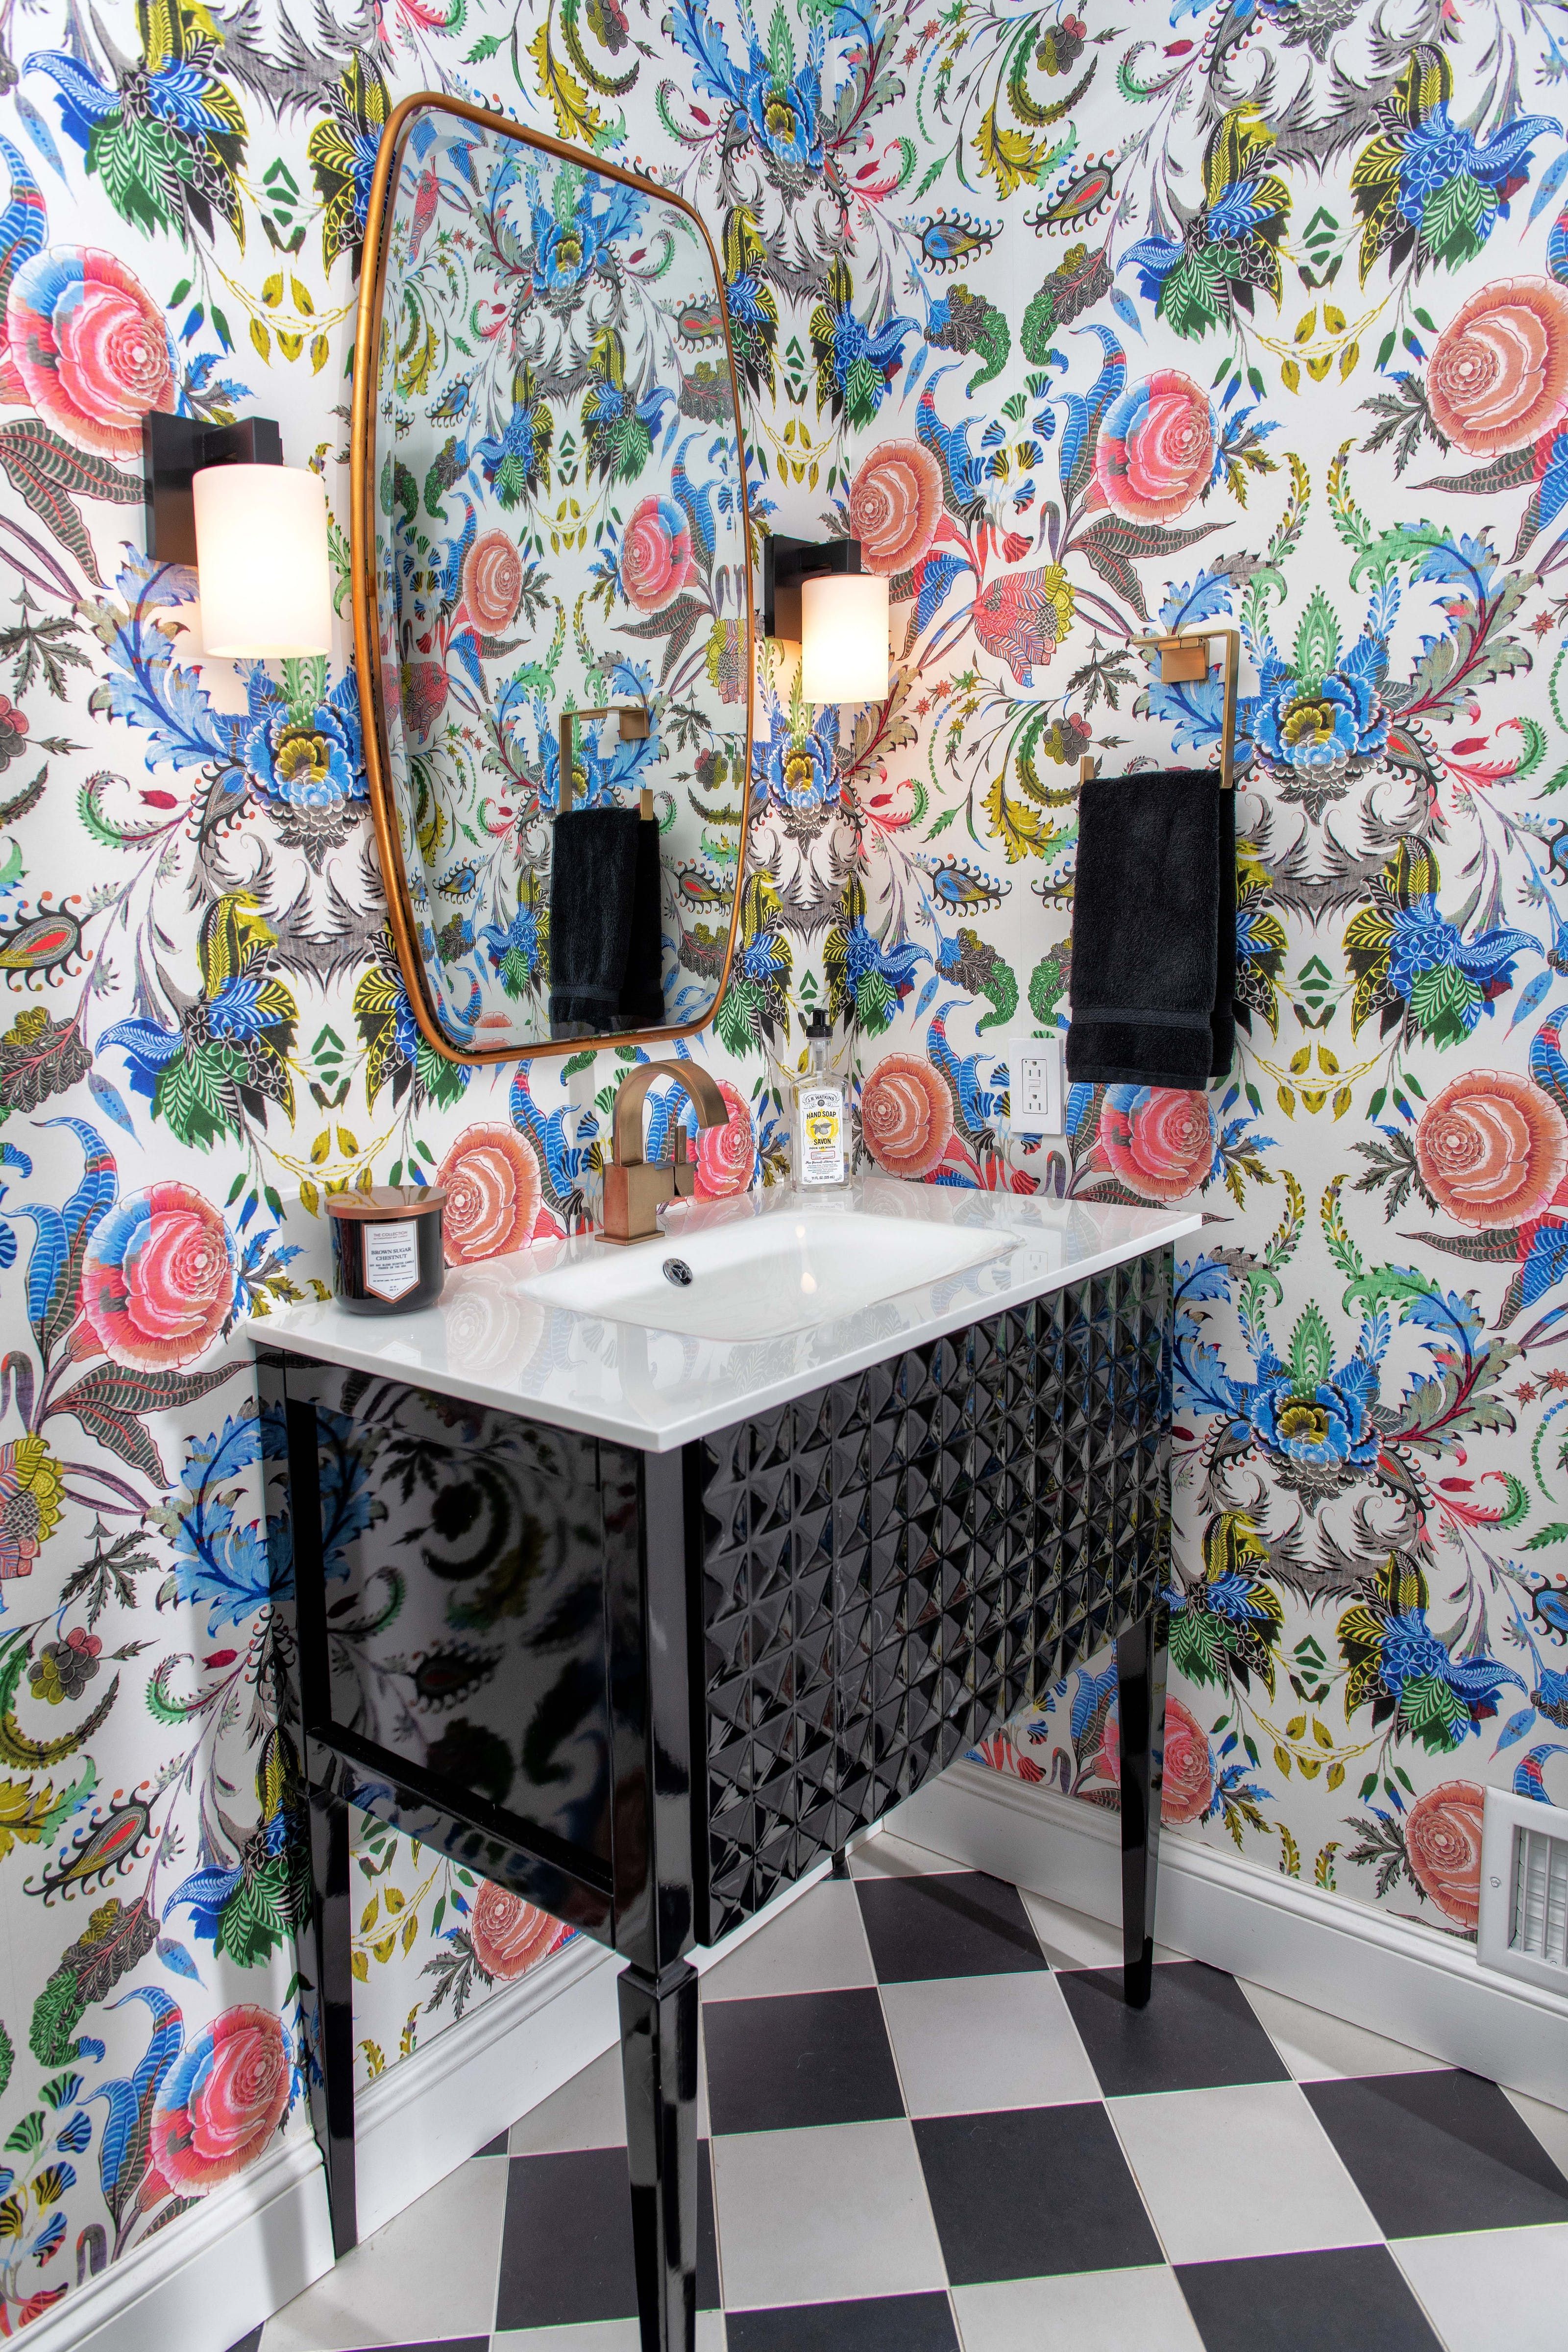 Bathroom wallpaper ideas – 10 styles to add a ton of color and character |